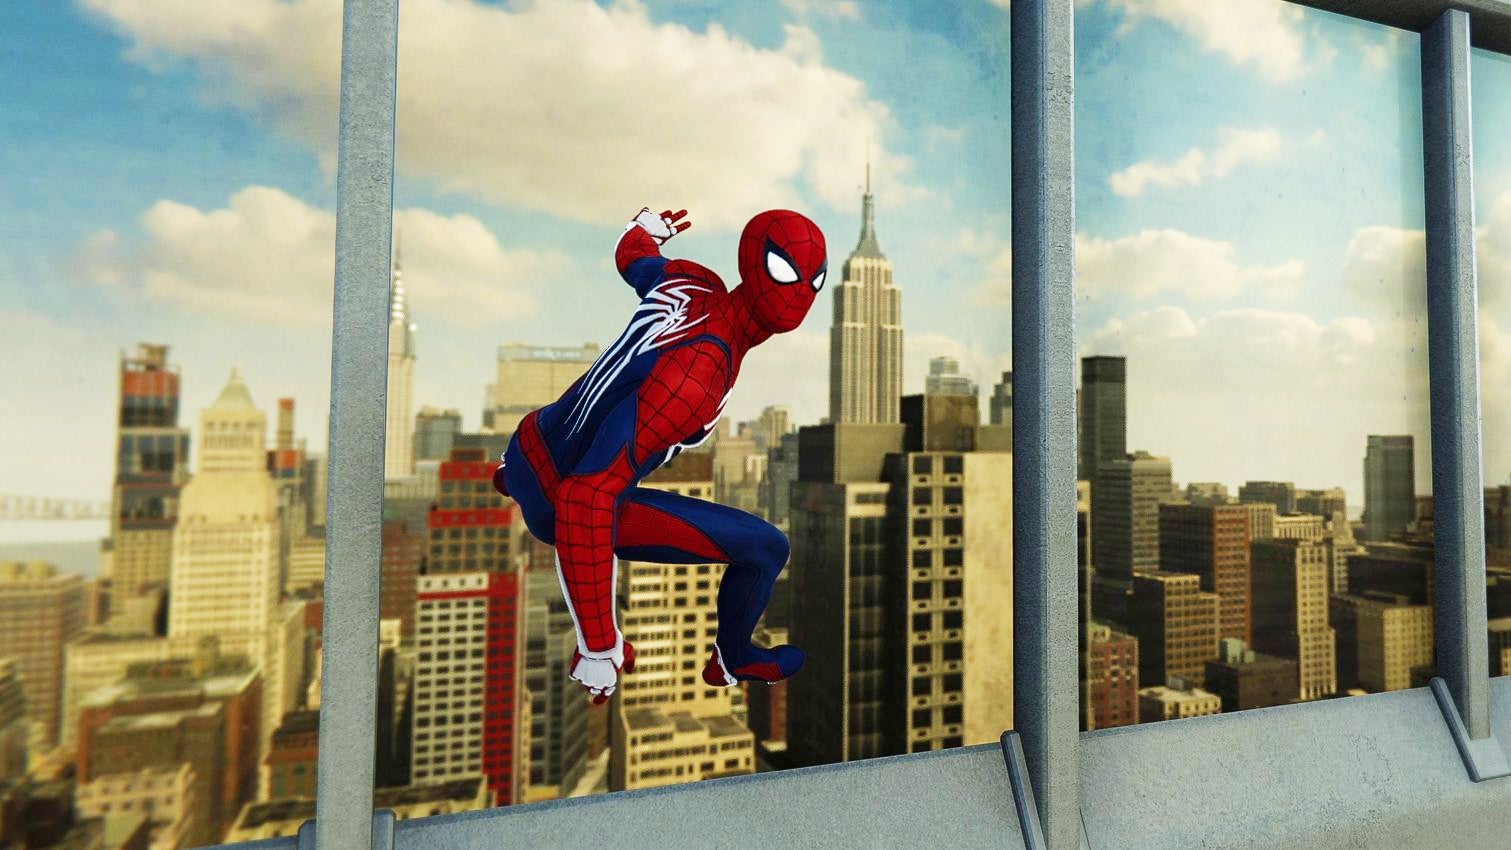 Spider-Man clings to a reflective window and looks out over New York City in Marvel's Spider-Man Remastered